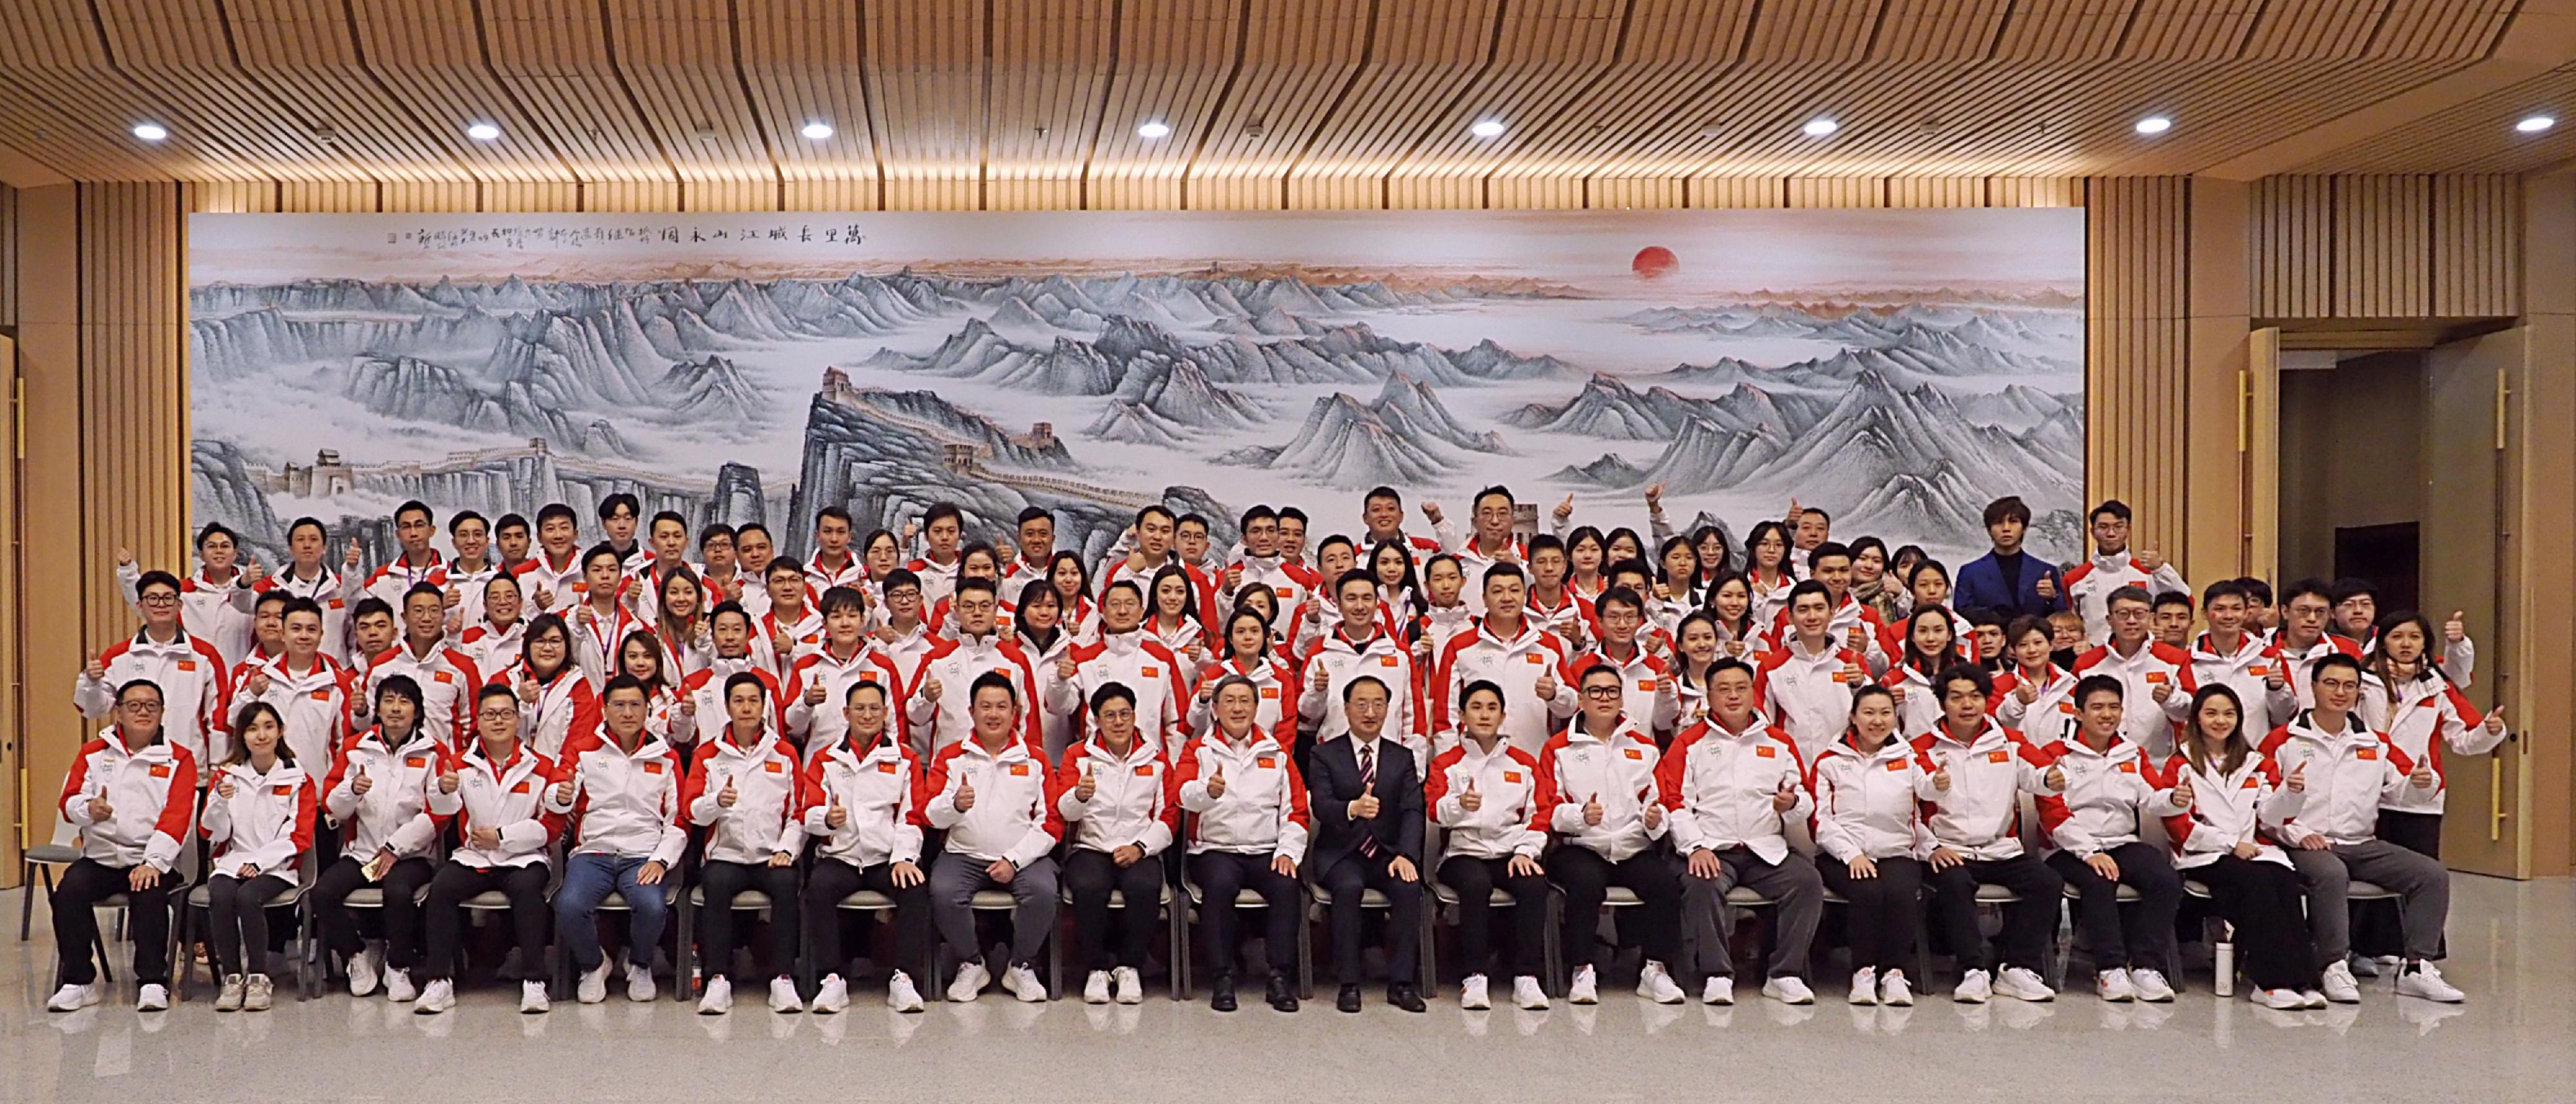 The Deputy Chief Secretary for Administration, Mr Cheuk Wing-hing (first row, 10th left), and the Director General of the Youth Department of the Liaison Office of the Central People's Government in the Hong Kong Special Administrative Region, Mr Zhang Zhihua (first row, ninth right), are pictured with youth representatives from Hong Kong before attending a sharing session today (November 22) in Beijing.